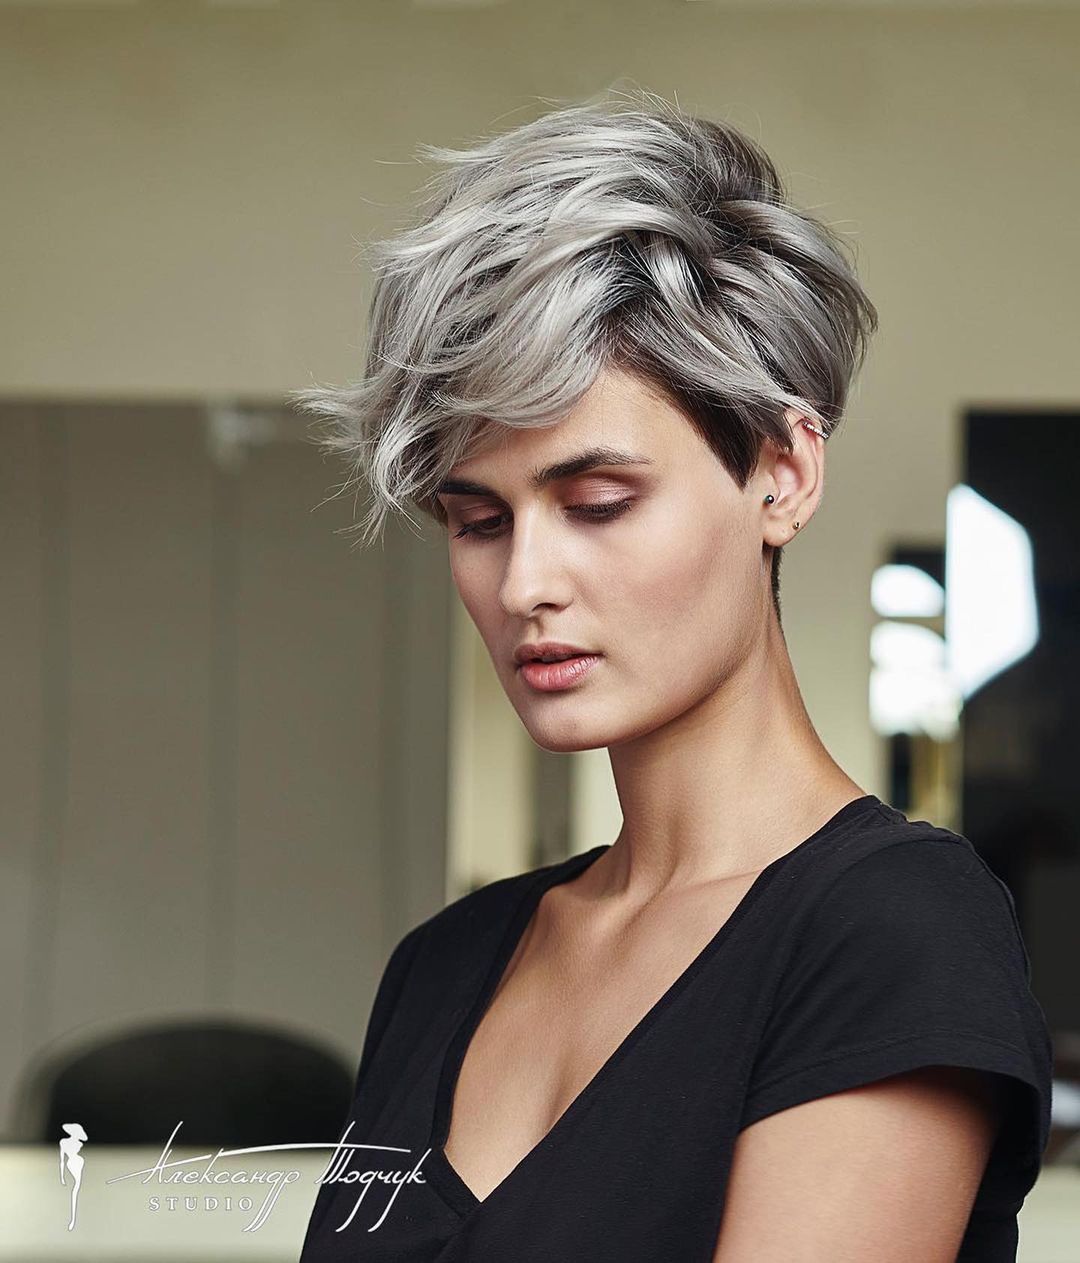 10 Pixie Cut & Color Ideas - Outrageous New Short Hairstyles